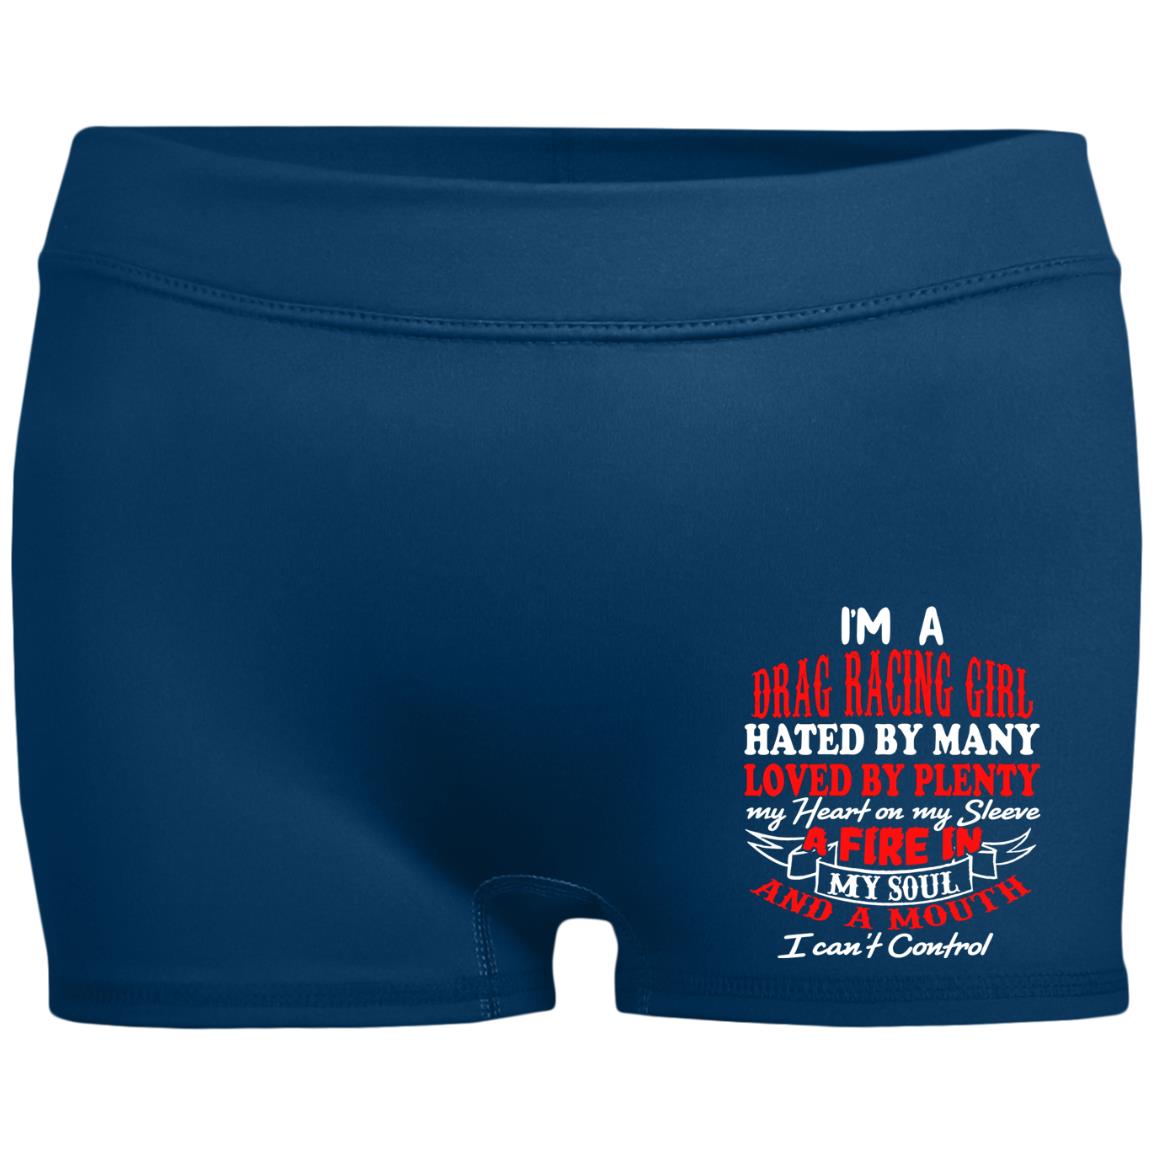 I'm A Drag Racing Girl Hated By Many Loved By Plenty Ladies' Fitted Moisture-Wicking 2.5 inch Inseam Shorts